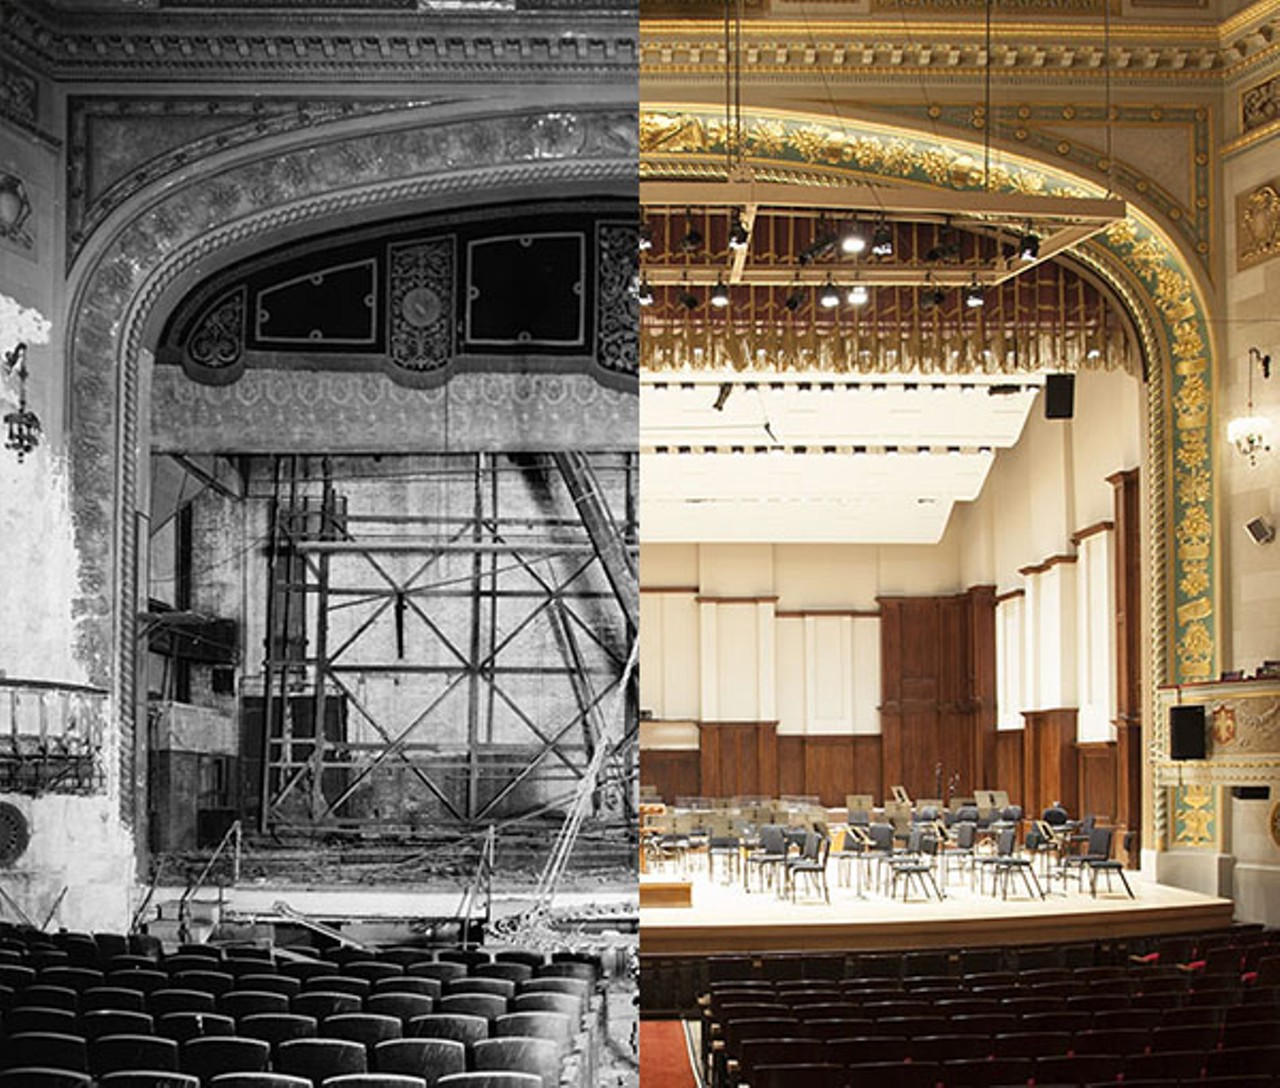 Orchestra Hall
1970 and 2013 
Now known as the Max M. and Marjorie S. Fisher Music Center, this building was the first home to the Detroit Symphony Orchestra. The DSO left 20 years later and it became a jazz club. It was abandoned until it was listed on the National Register of Historic Places in 1971. The DSO moved back in 1989. 
Photo via detroiturbex.com 